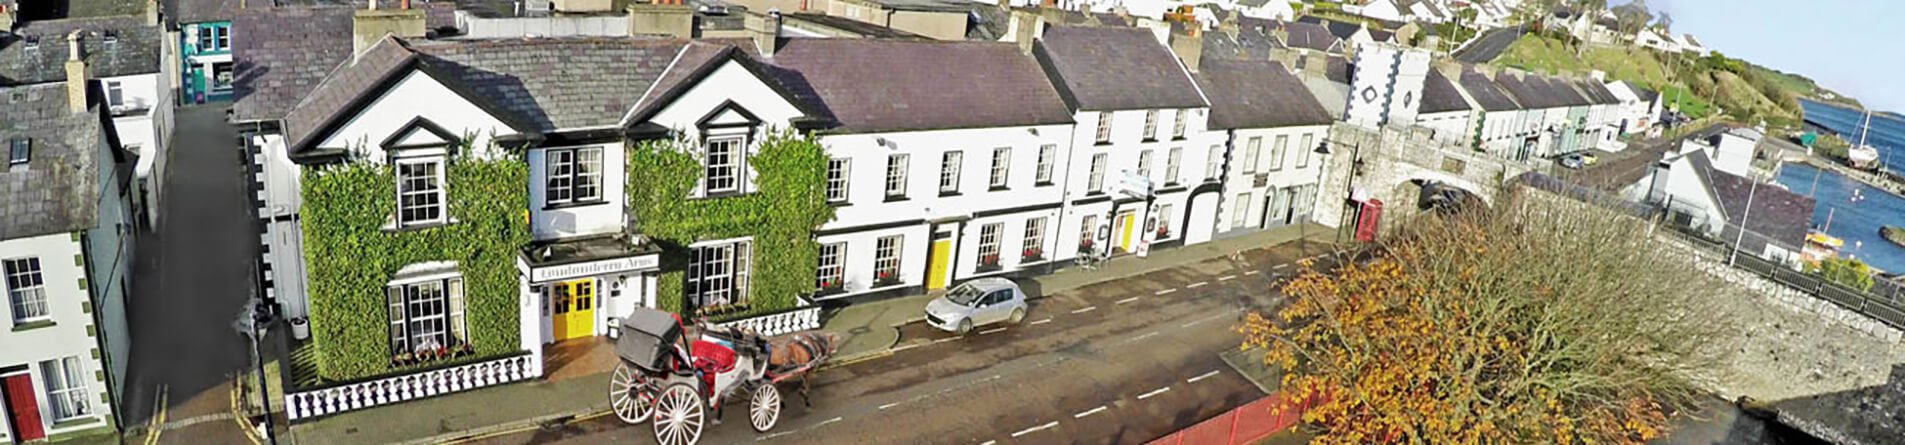 Londonderry Arms in Carnlough, Antrim, Northern Ireland